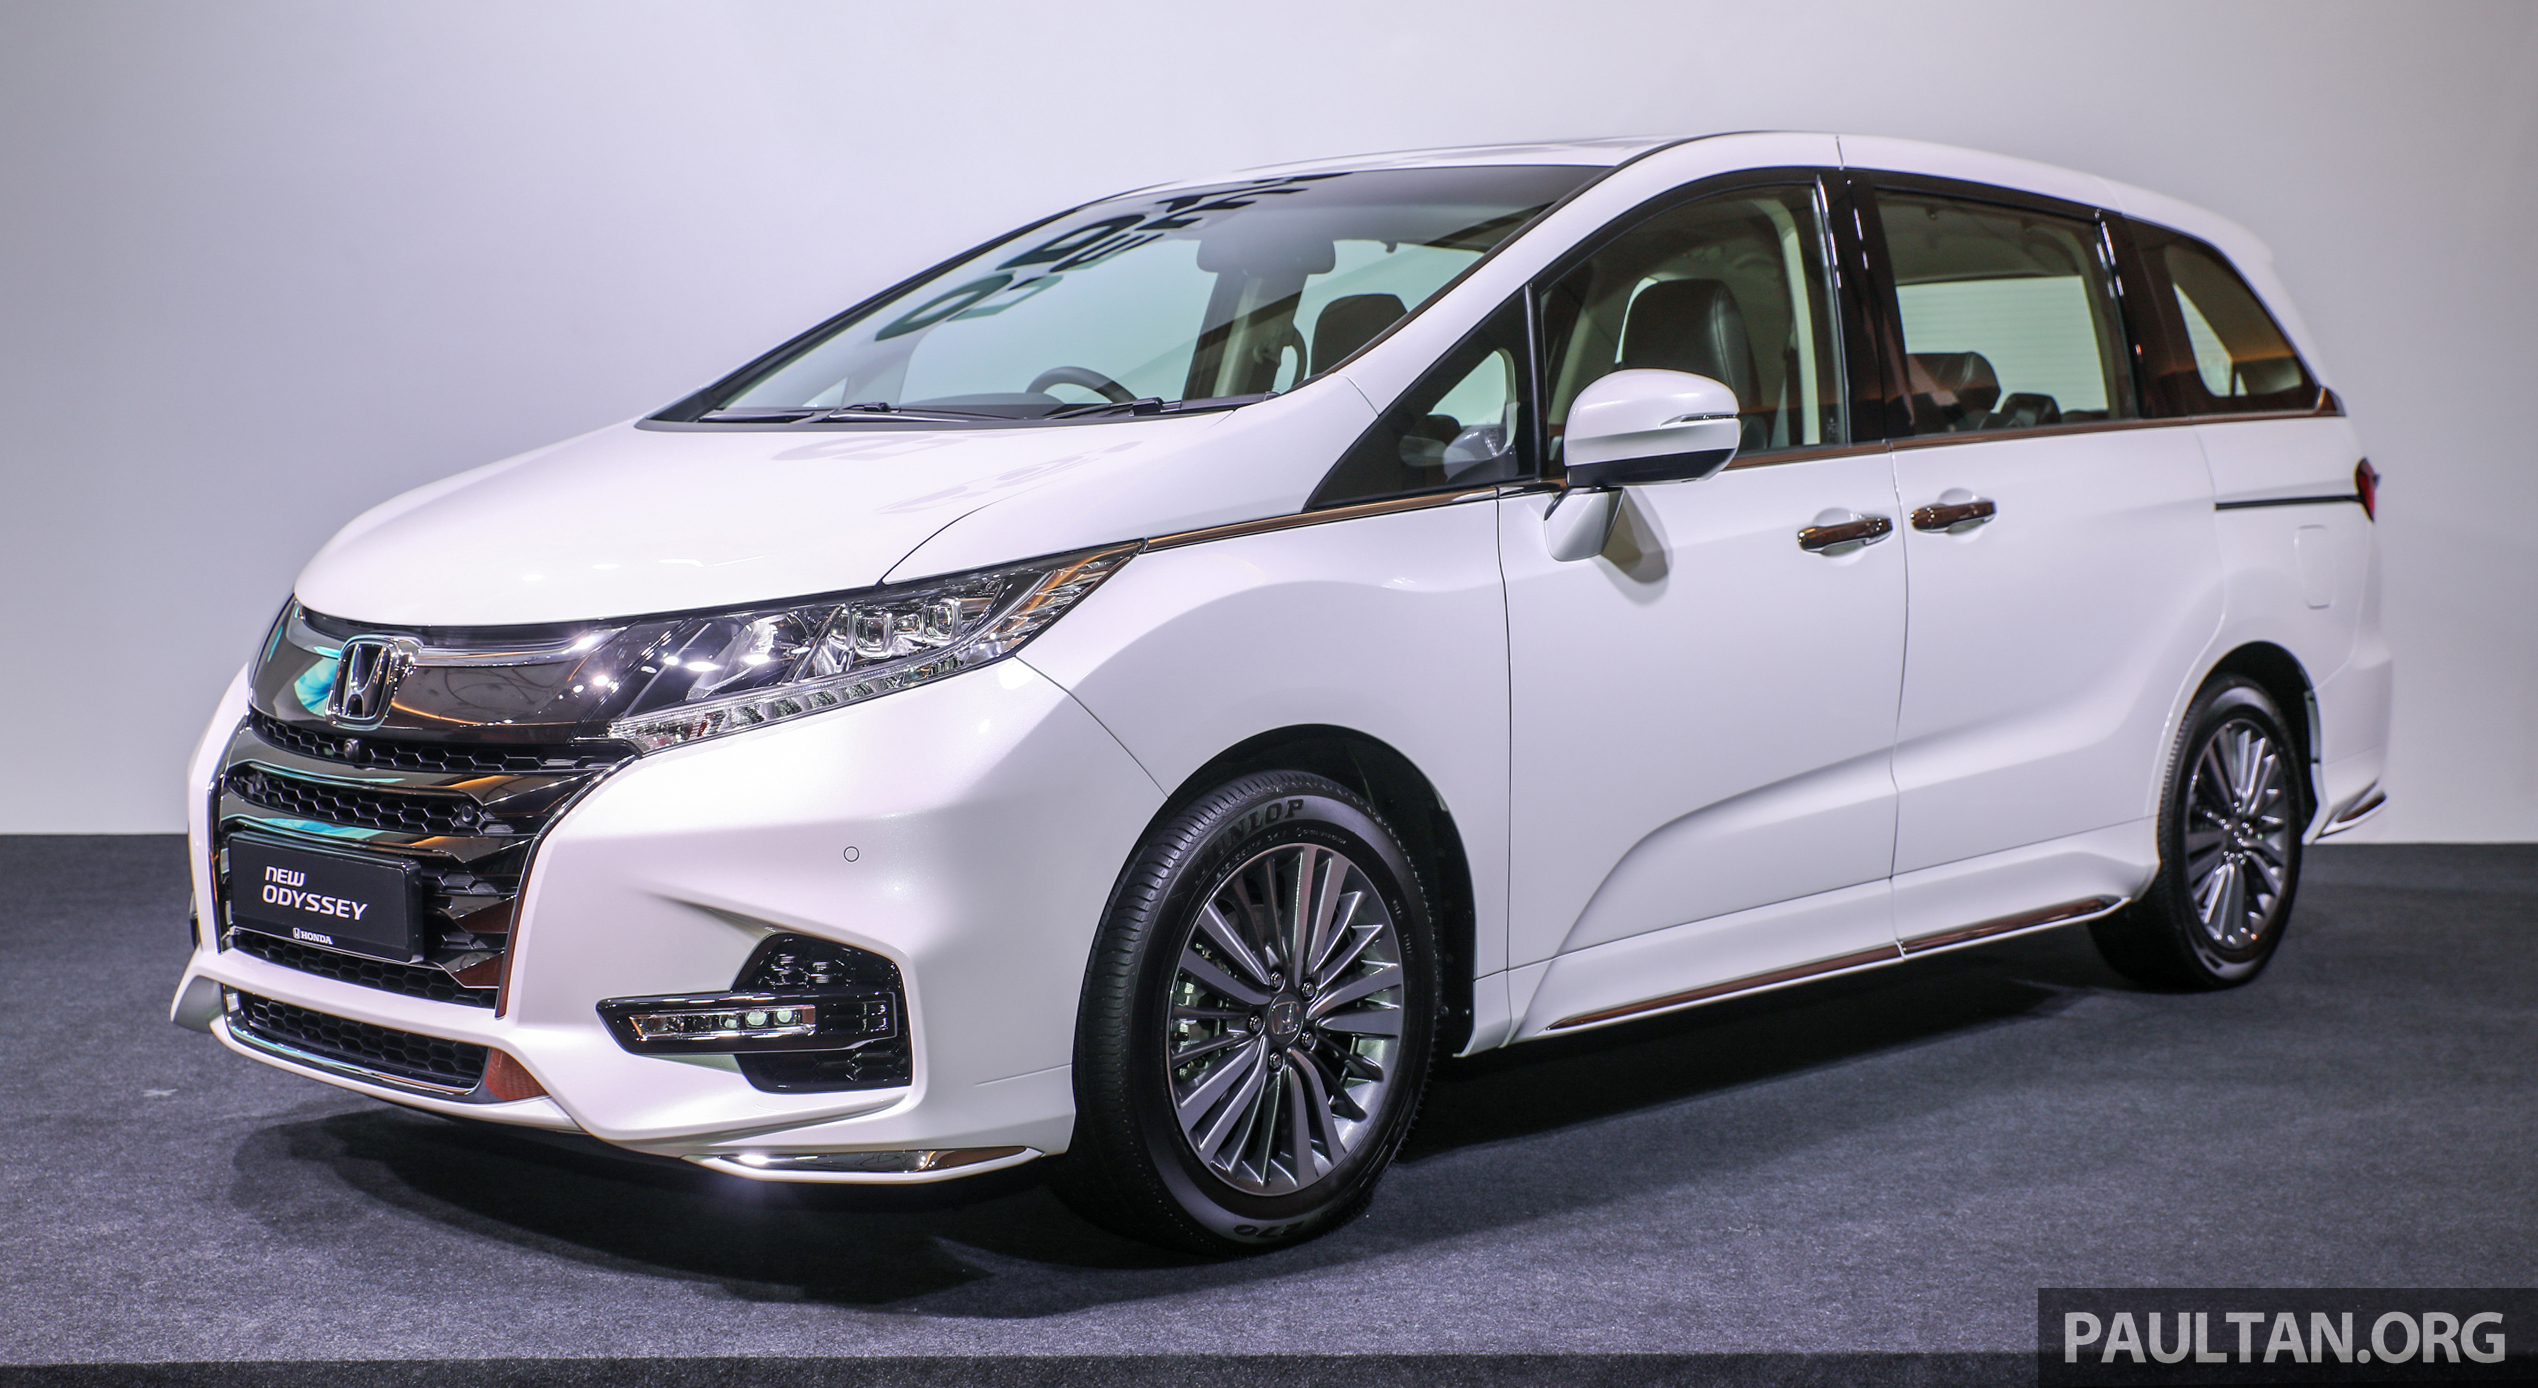 2018 Honda Odyssey Facelift Launched In Malaysia Now With Honda Sensing Priced At Rm254 800 Paultan Org